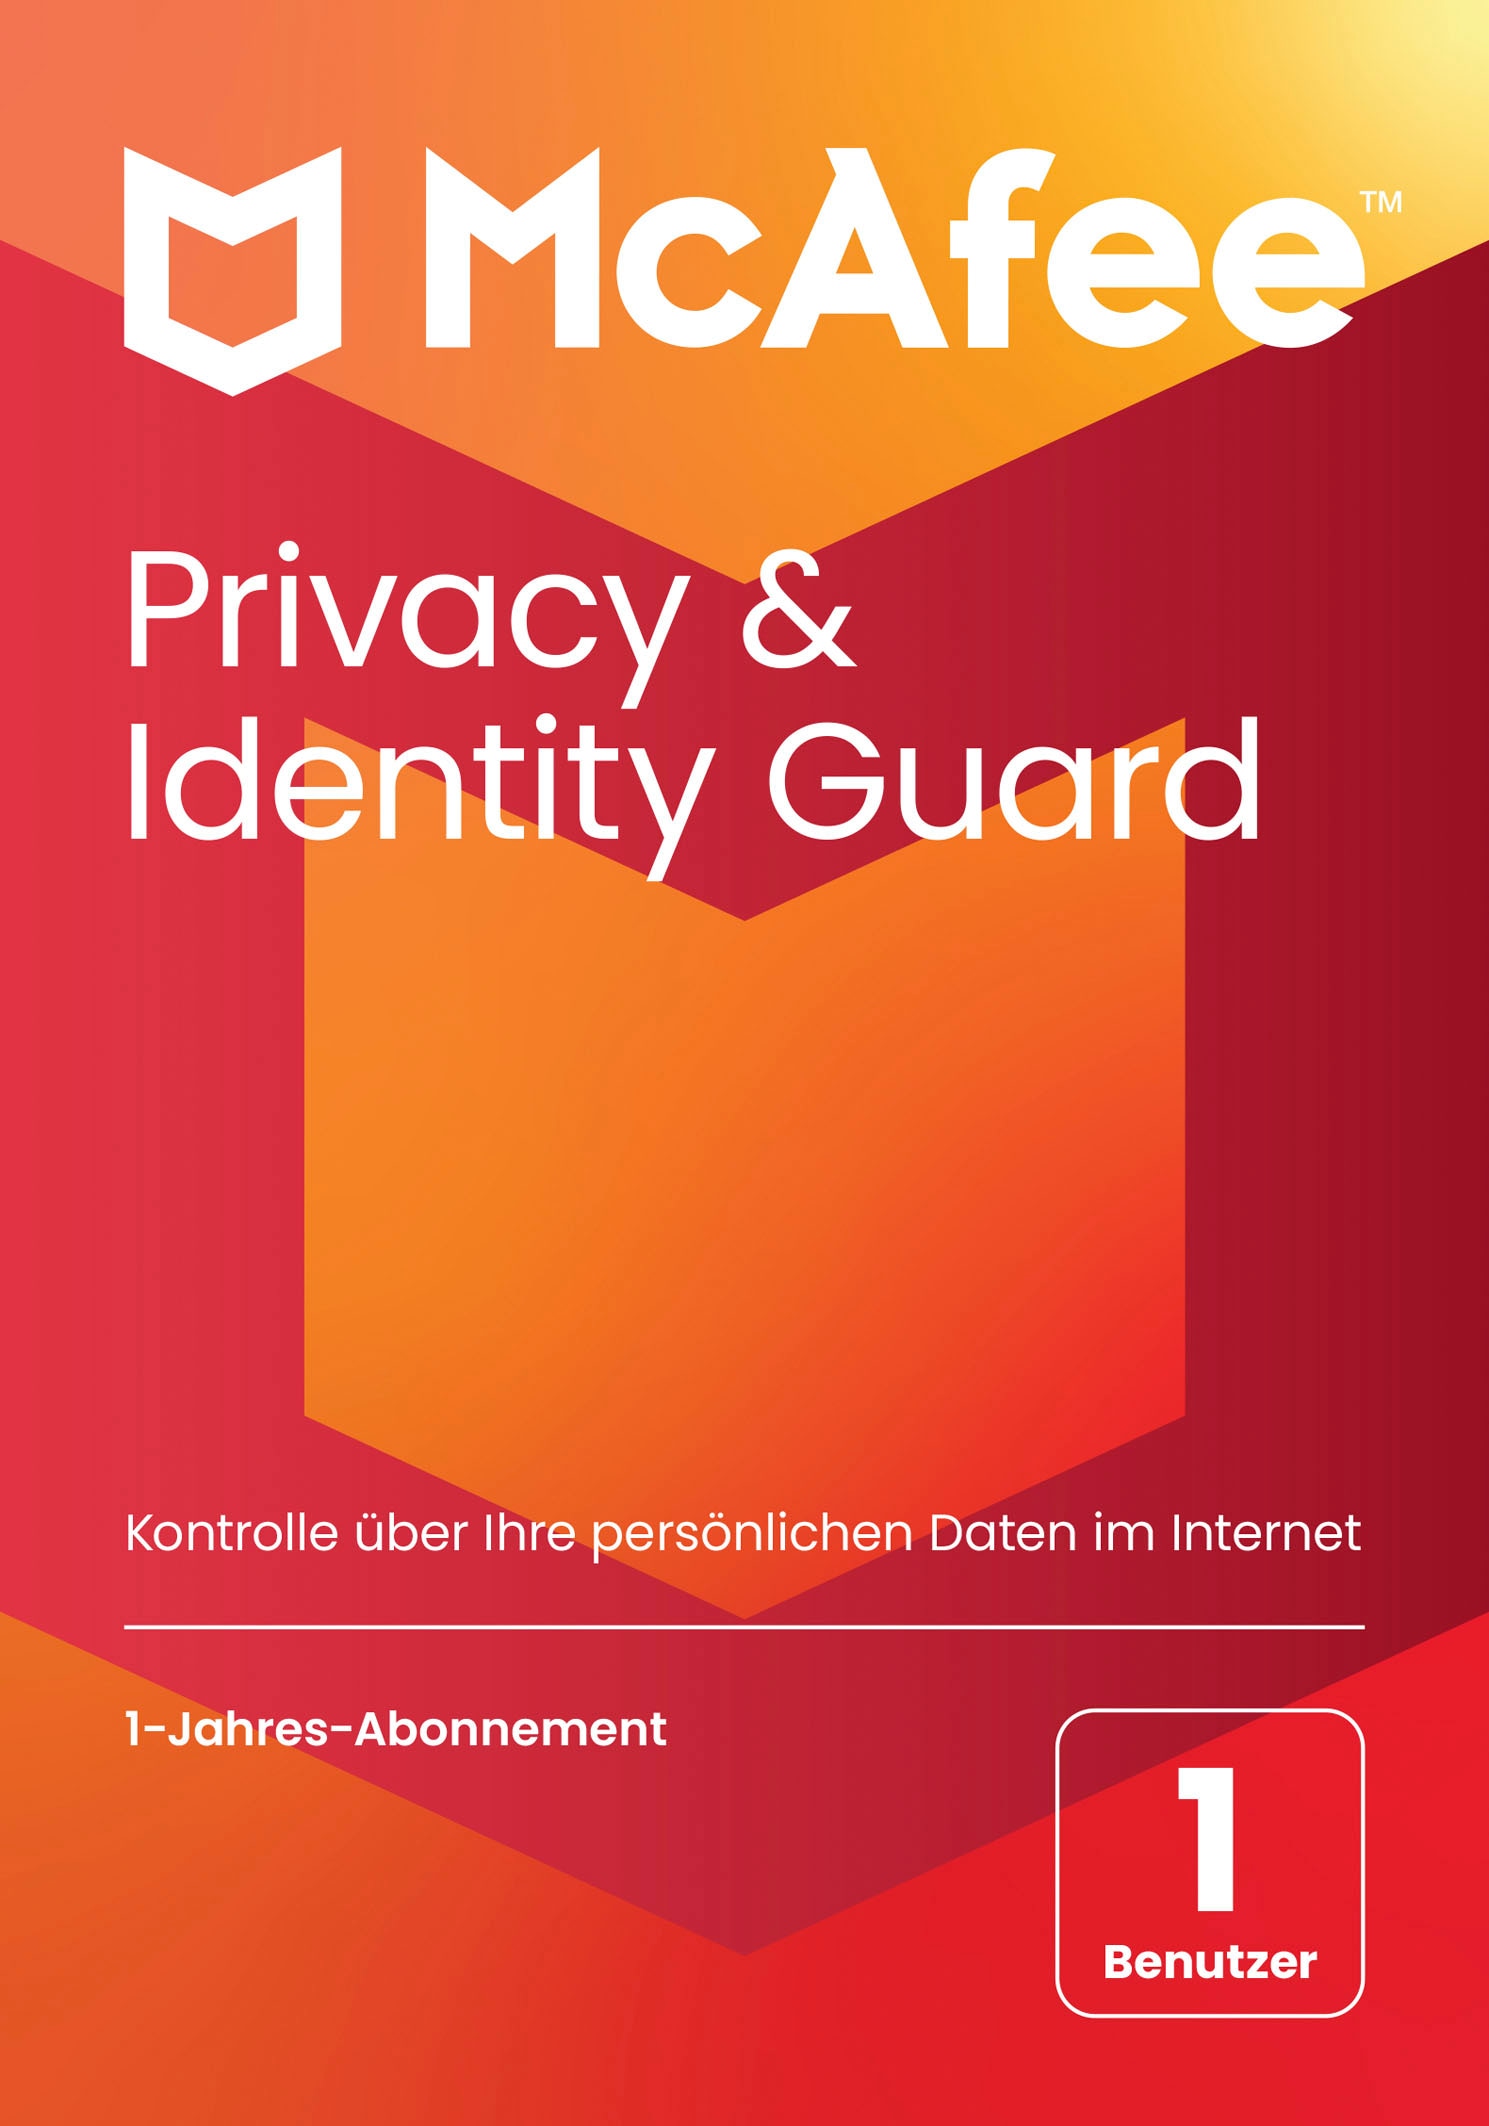 McAfee Virensoftware »McAfee Privacy & Identity Guard«